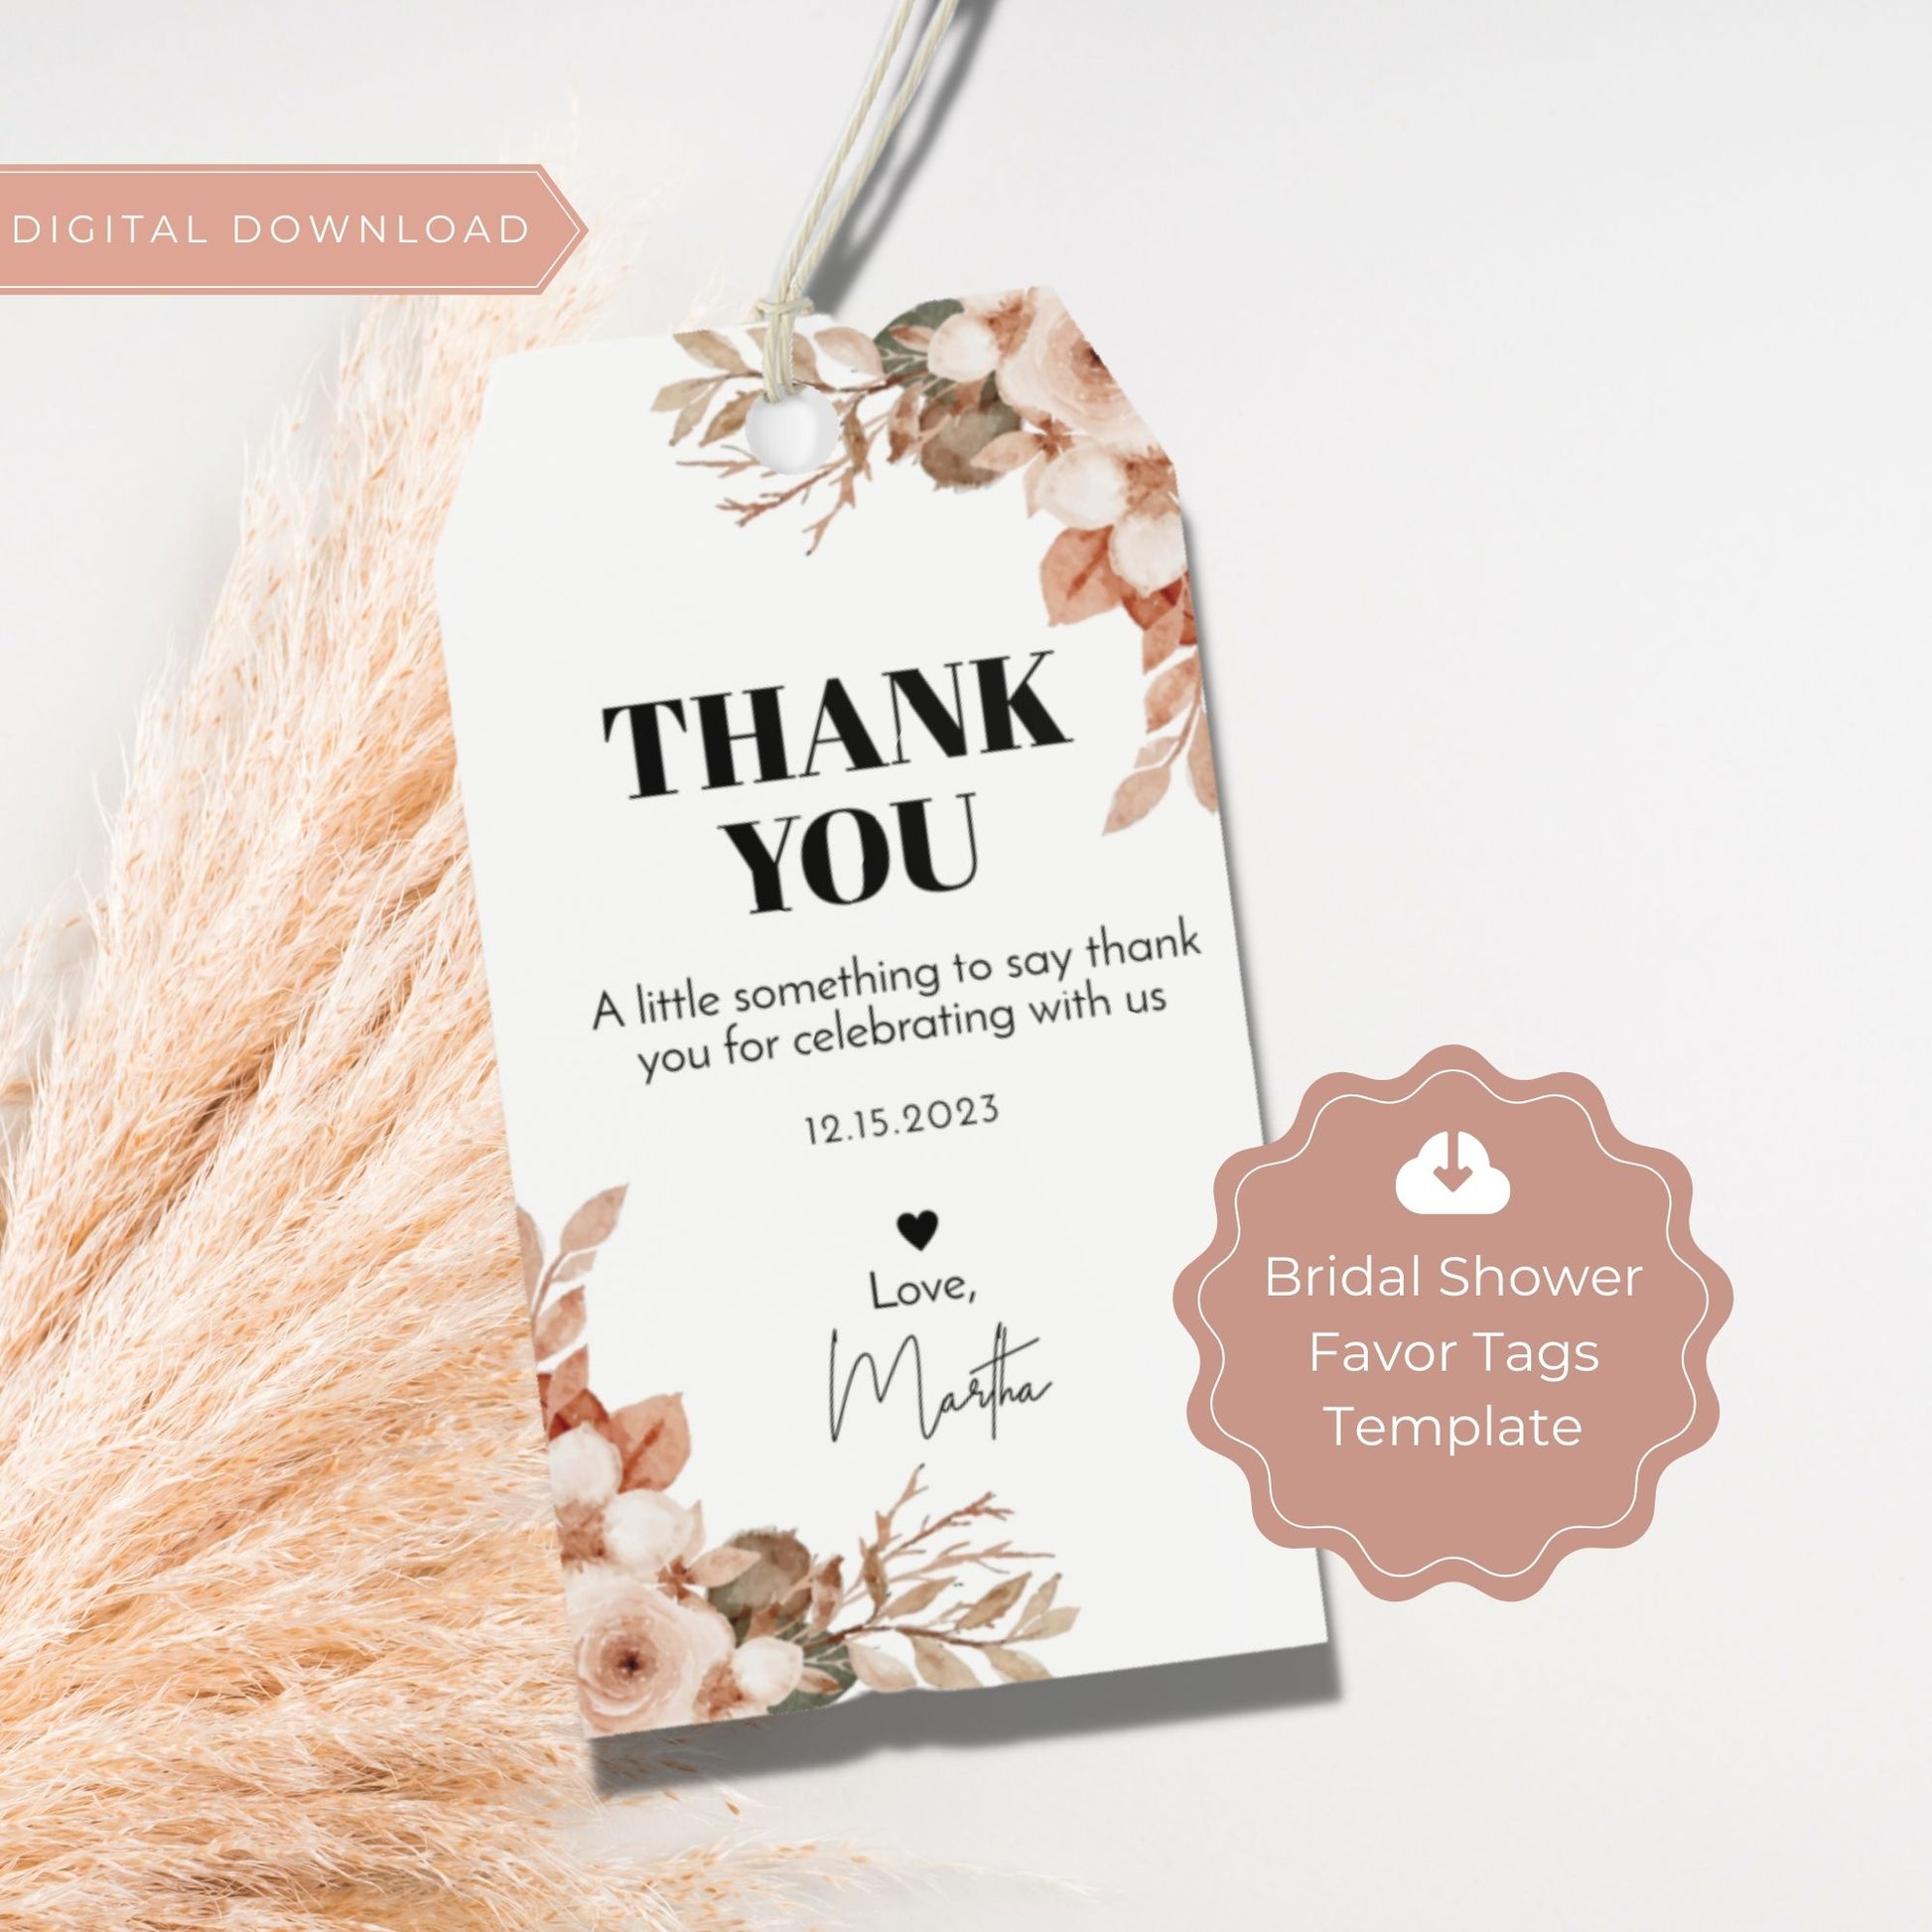 Bridal Shower Favor Tags Template